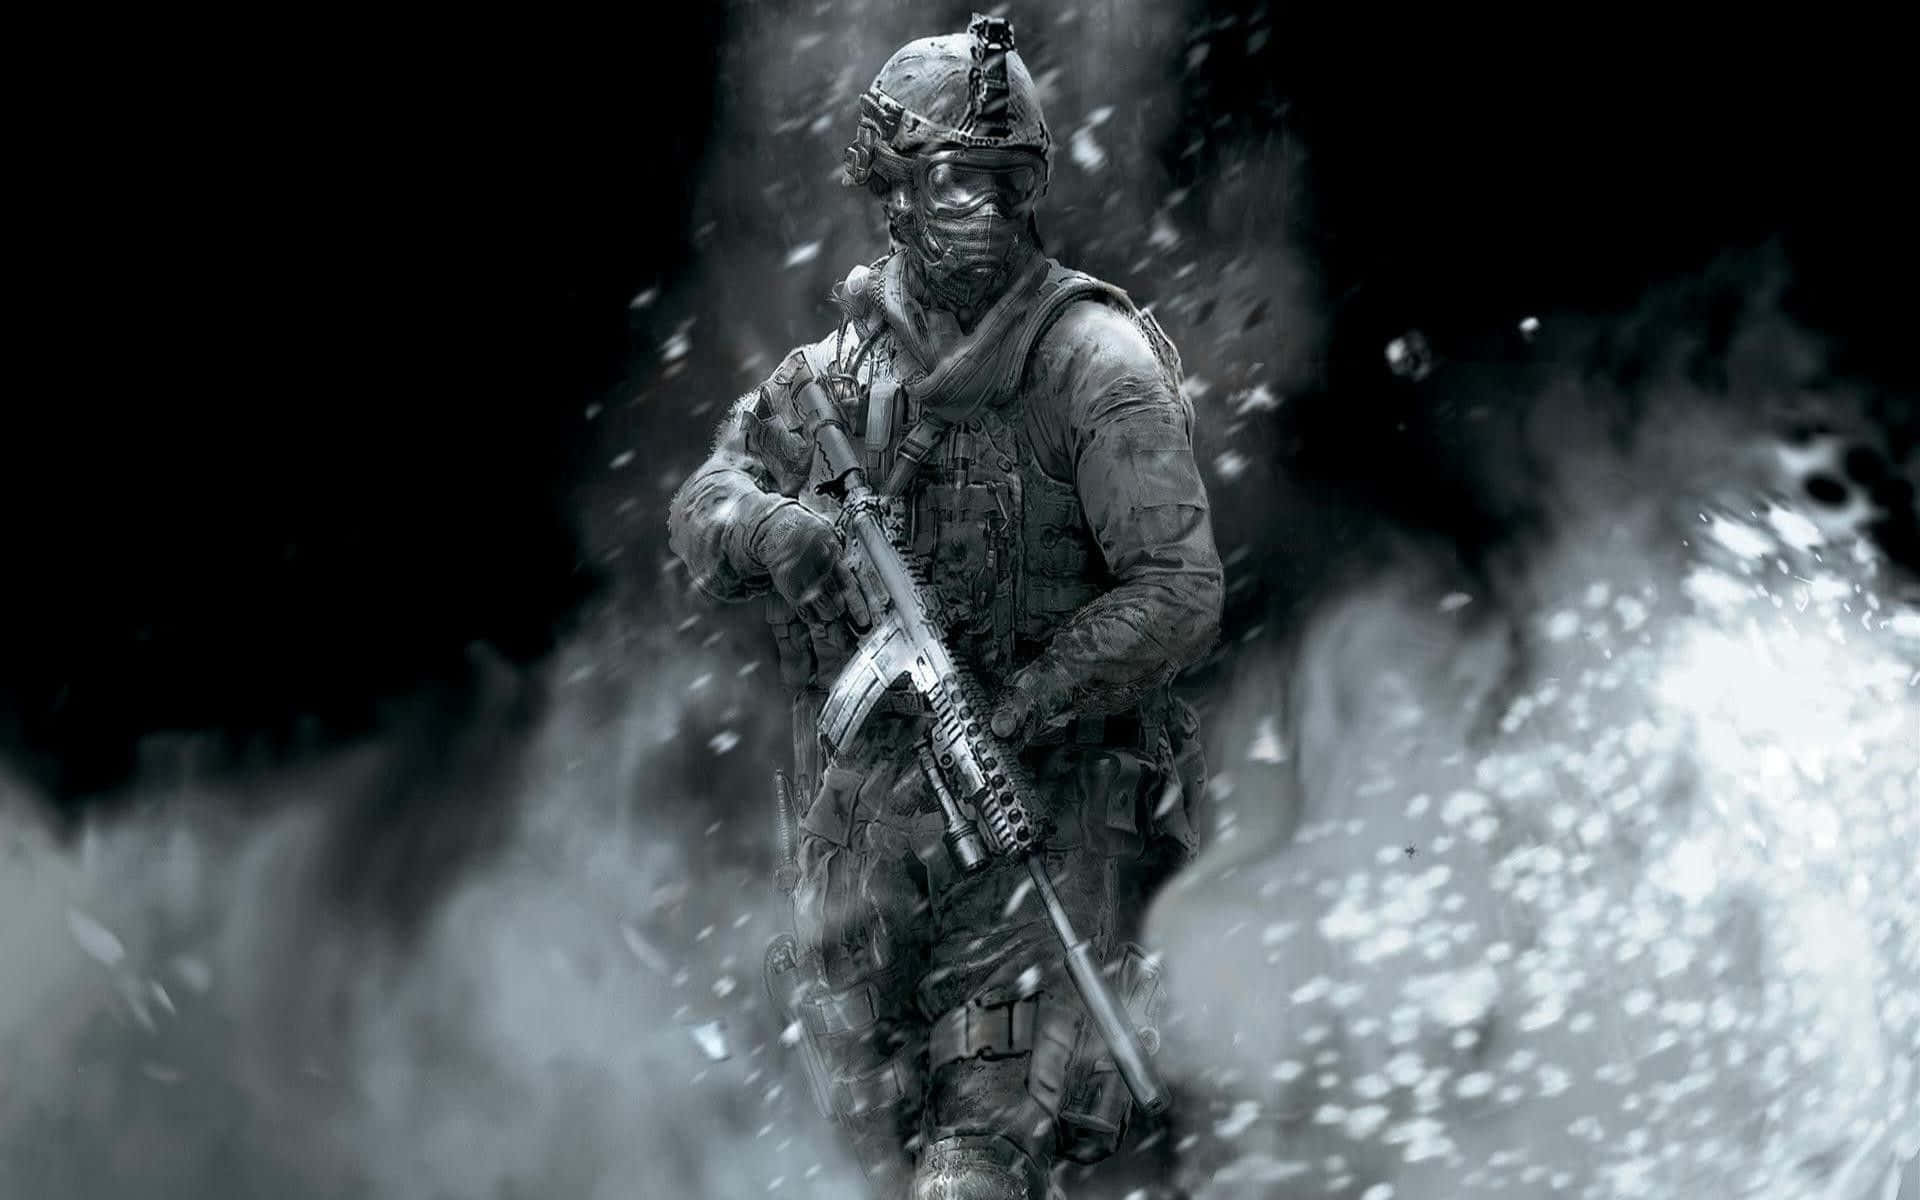 Call of Duty Soldiers in Action Wallpaper